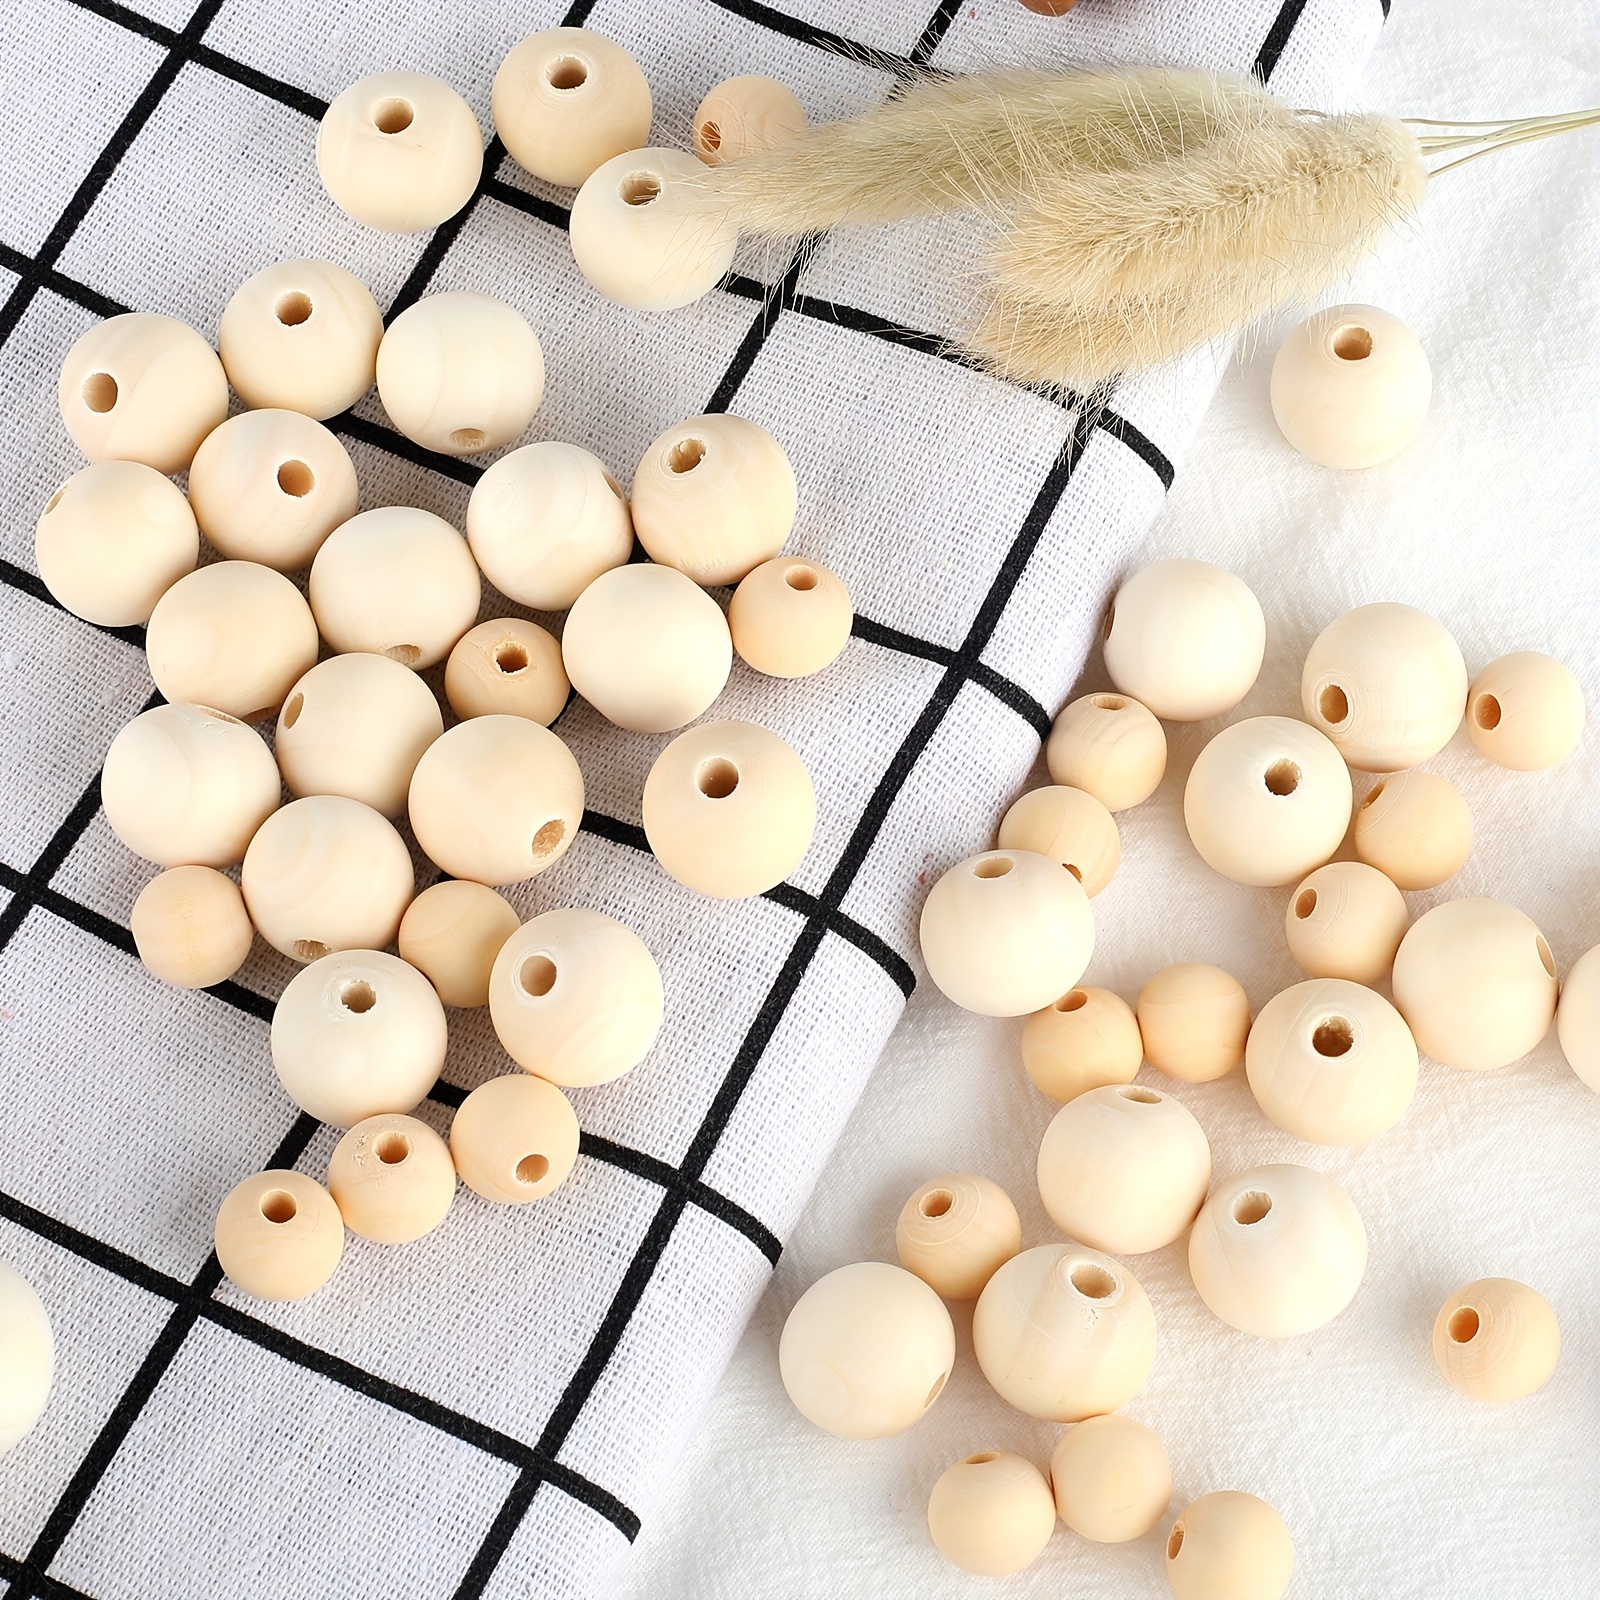 16mm Wooden Beads - 14 Pieces